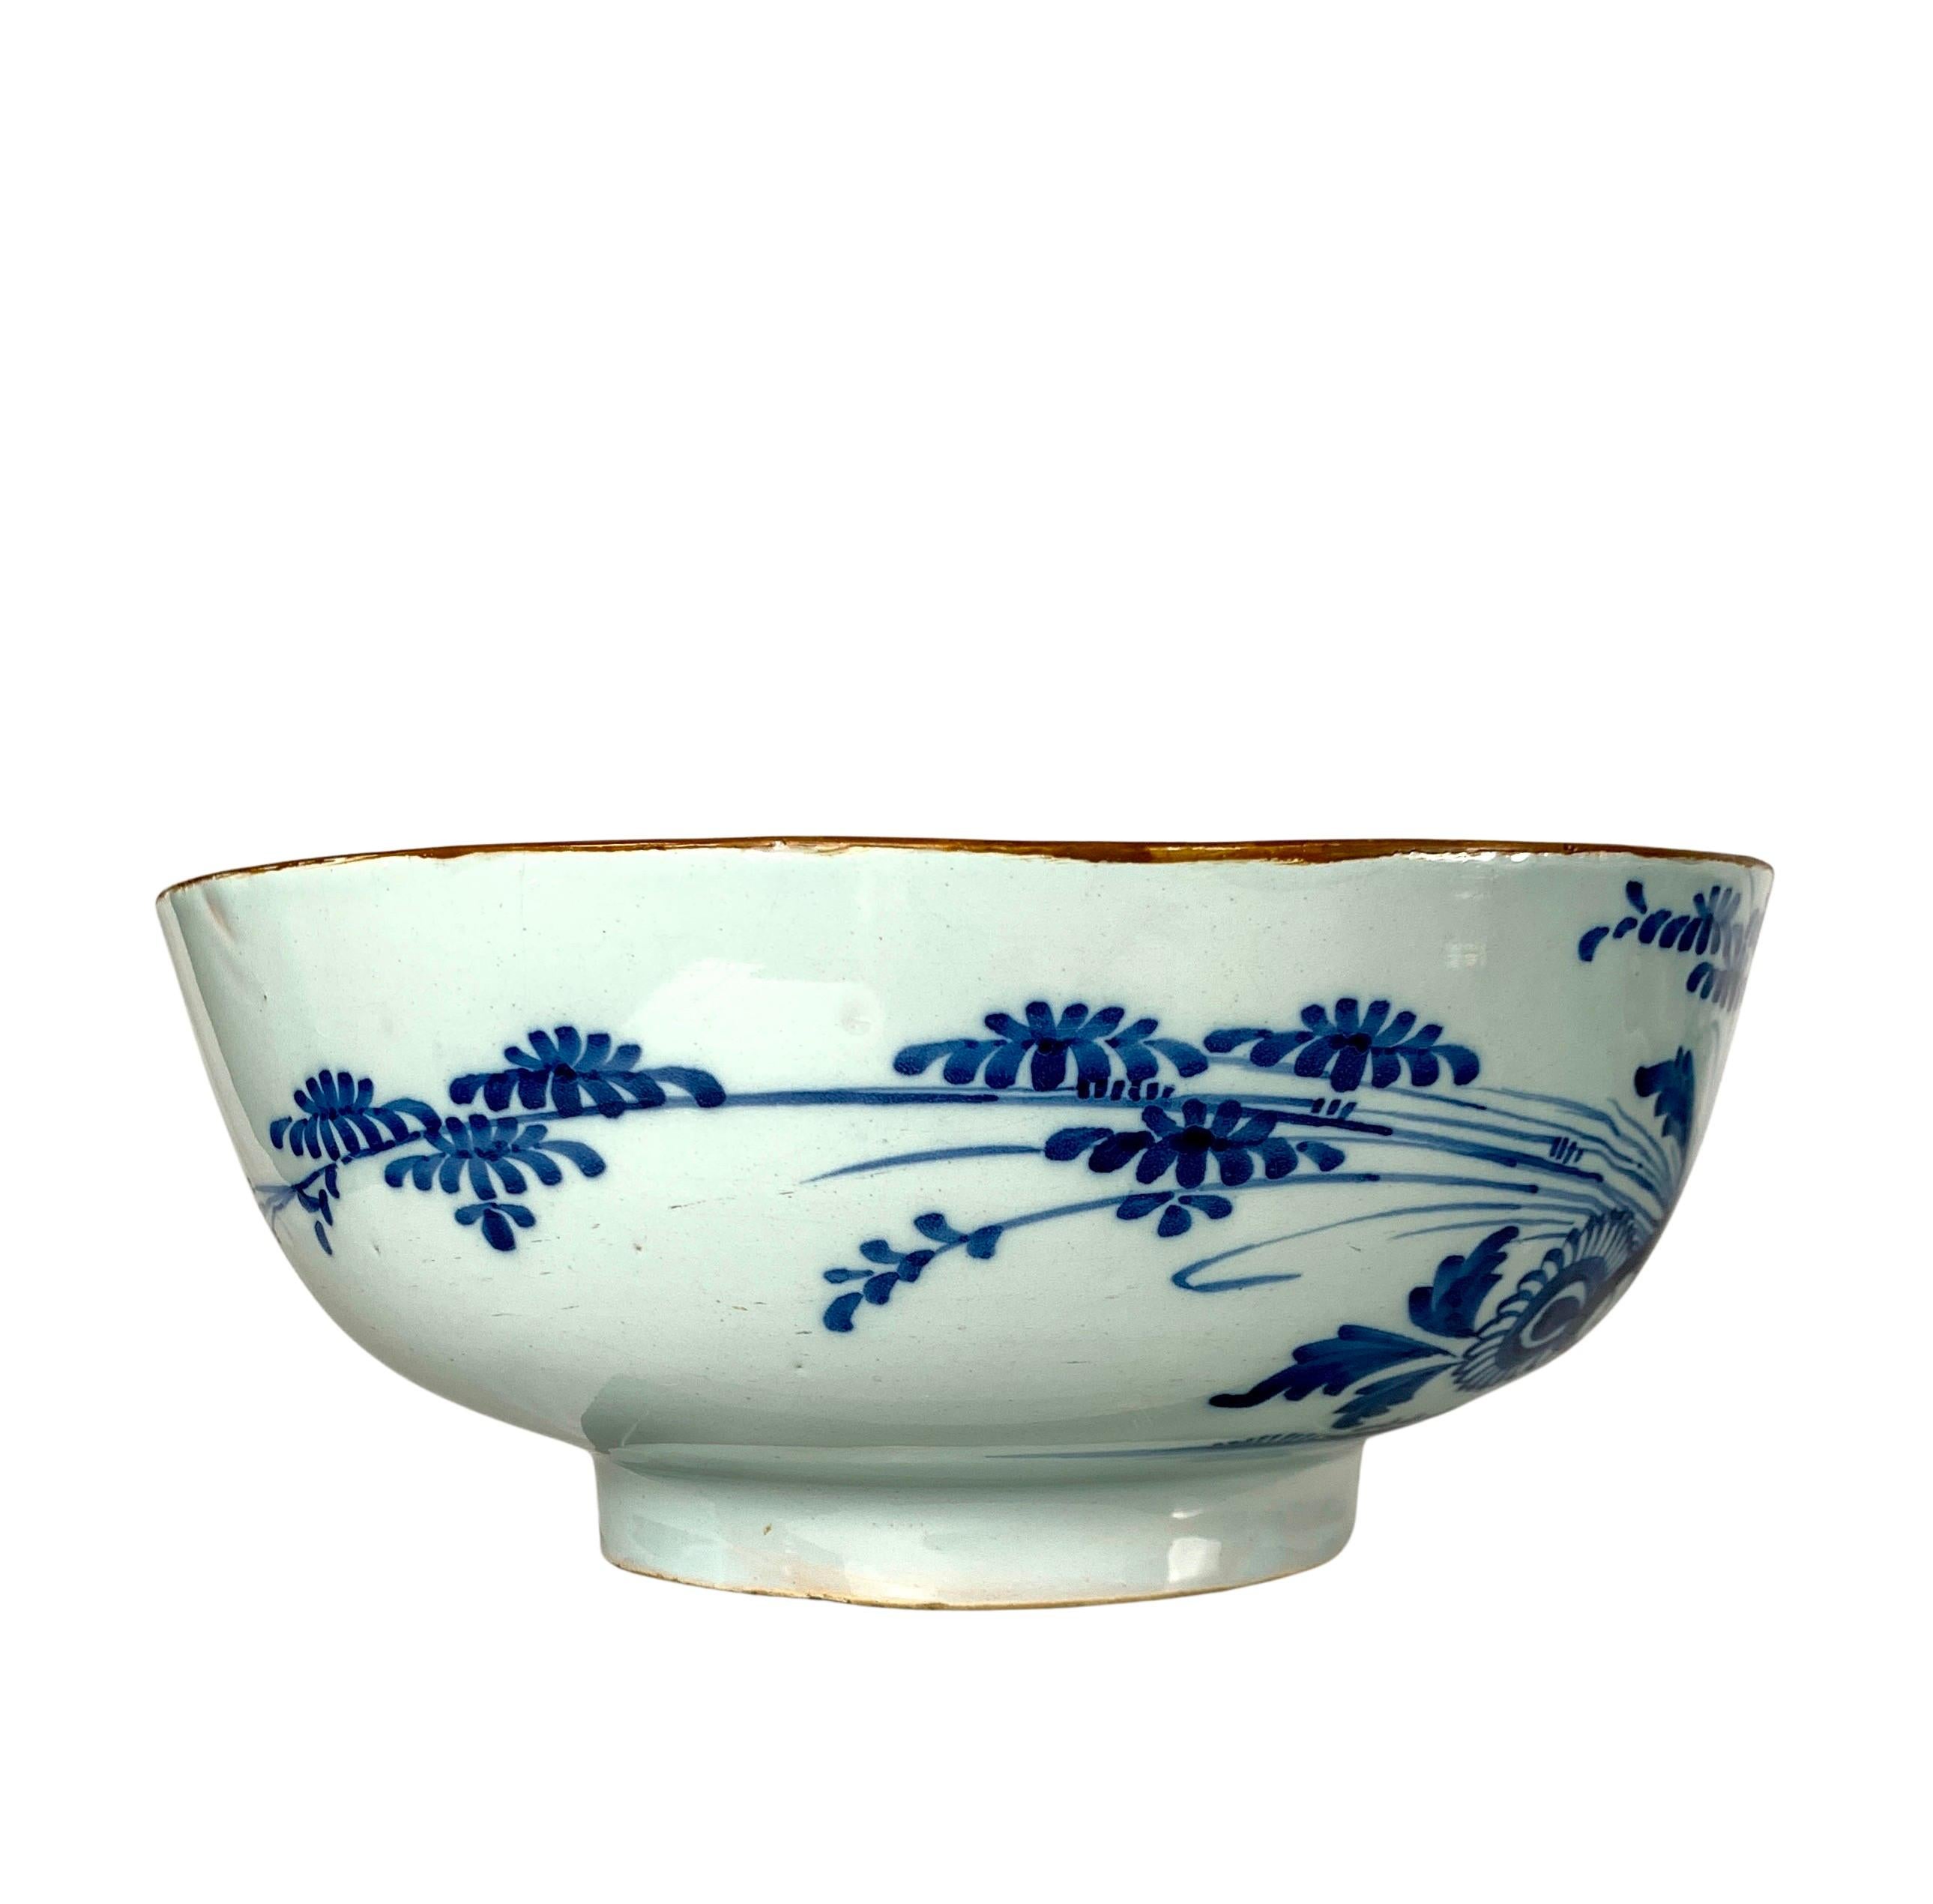 Rococo Blue and White Delft Punch Bowl Hand Painted Mid 18th Century Netherlands For Sale